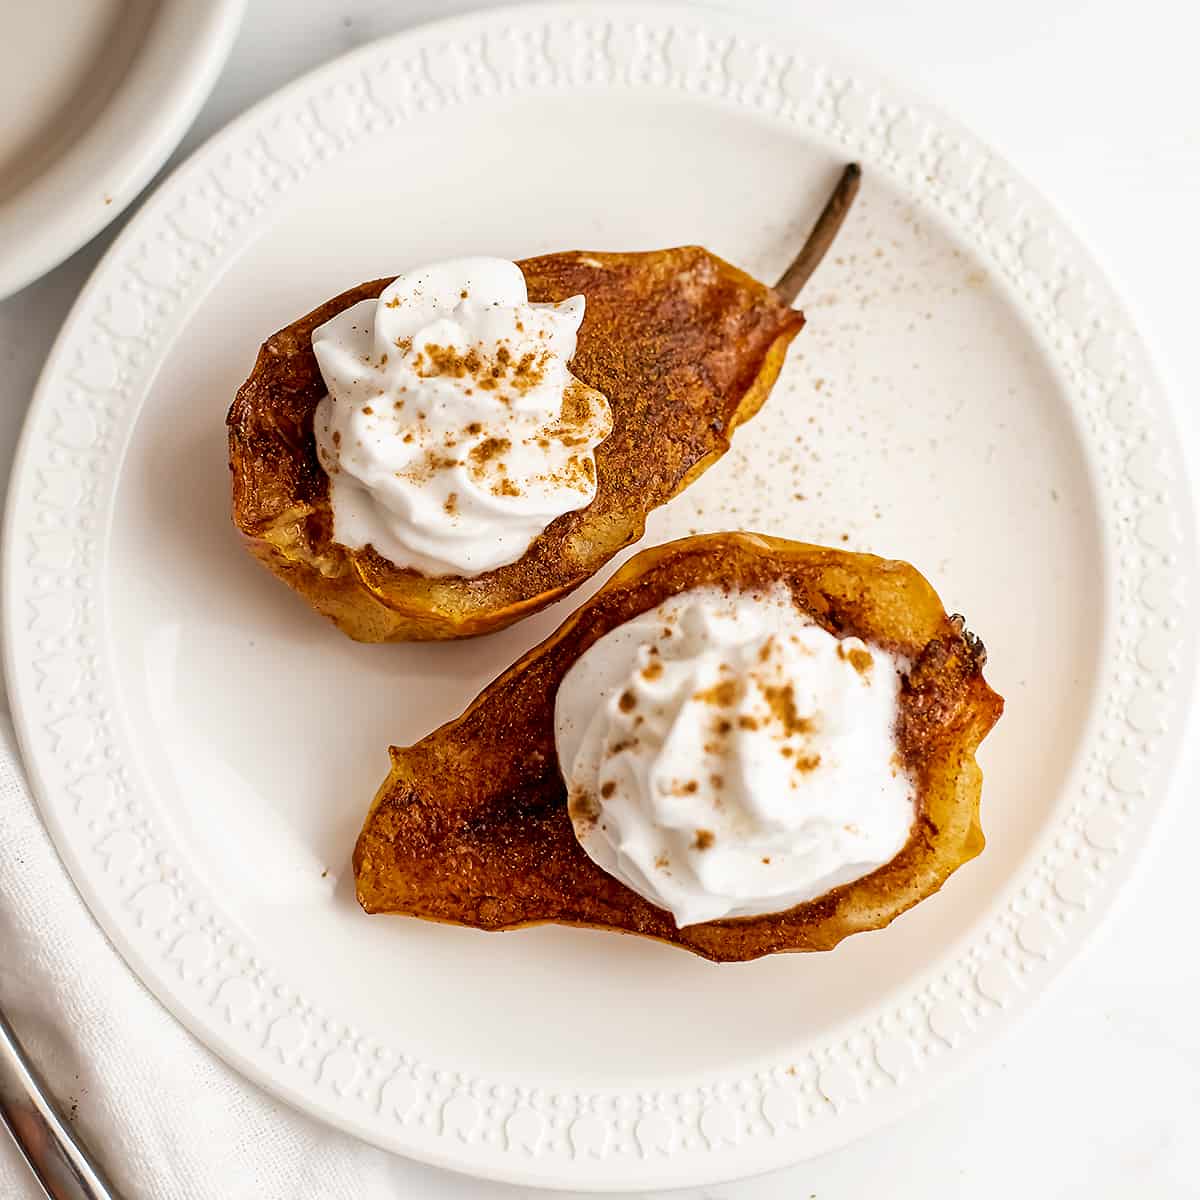 Air fryer pears with whipped cream on top on a white plate.